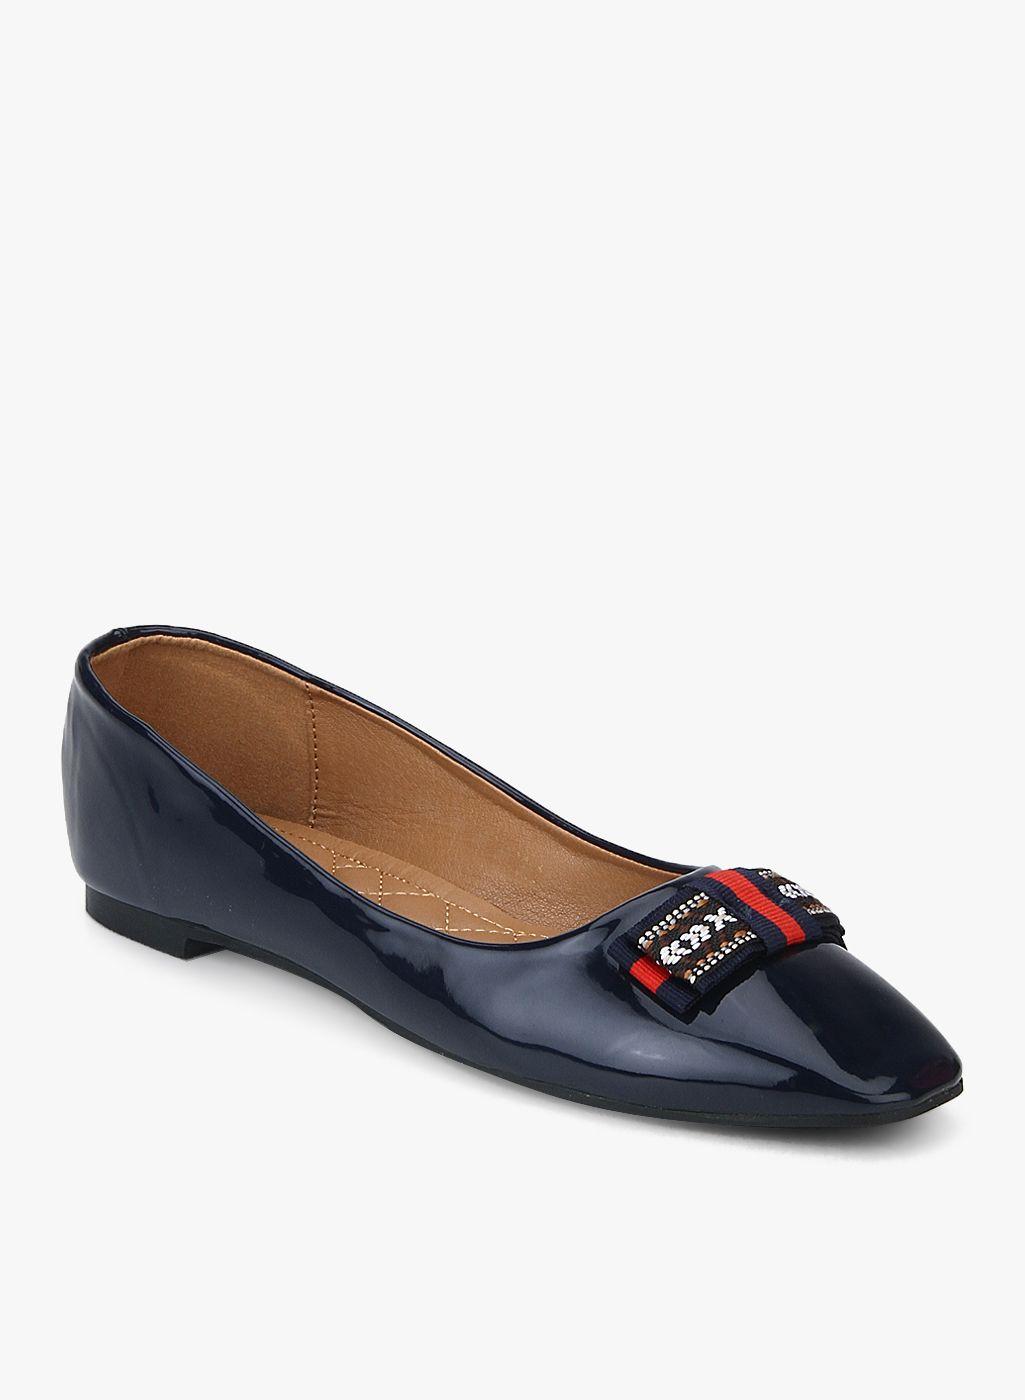 navy blue belly shoes